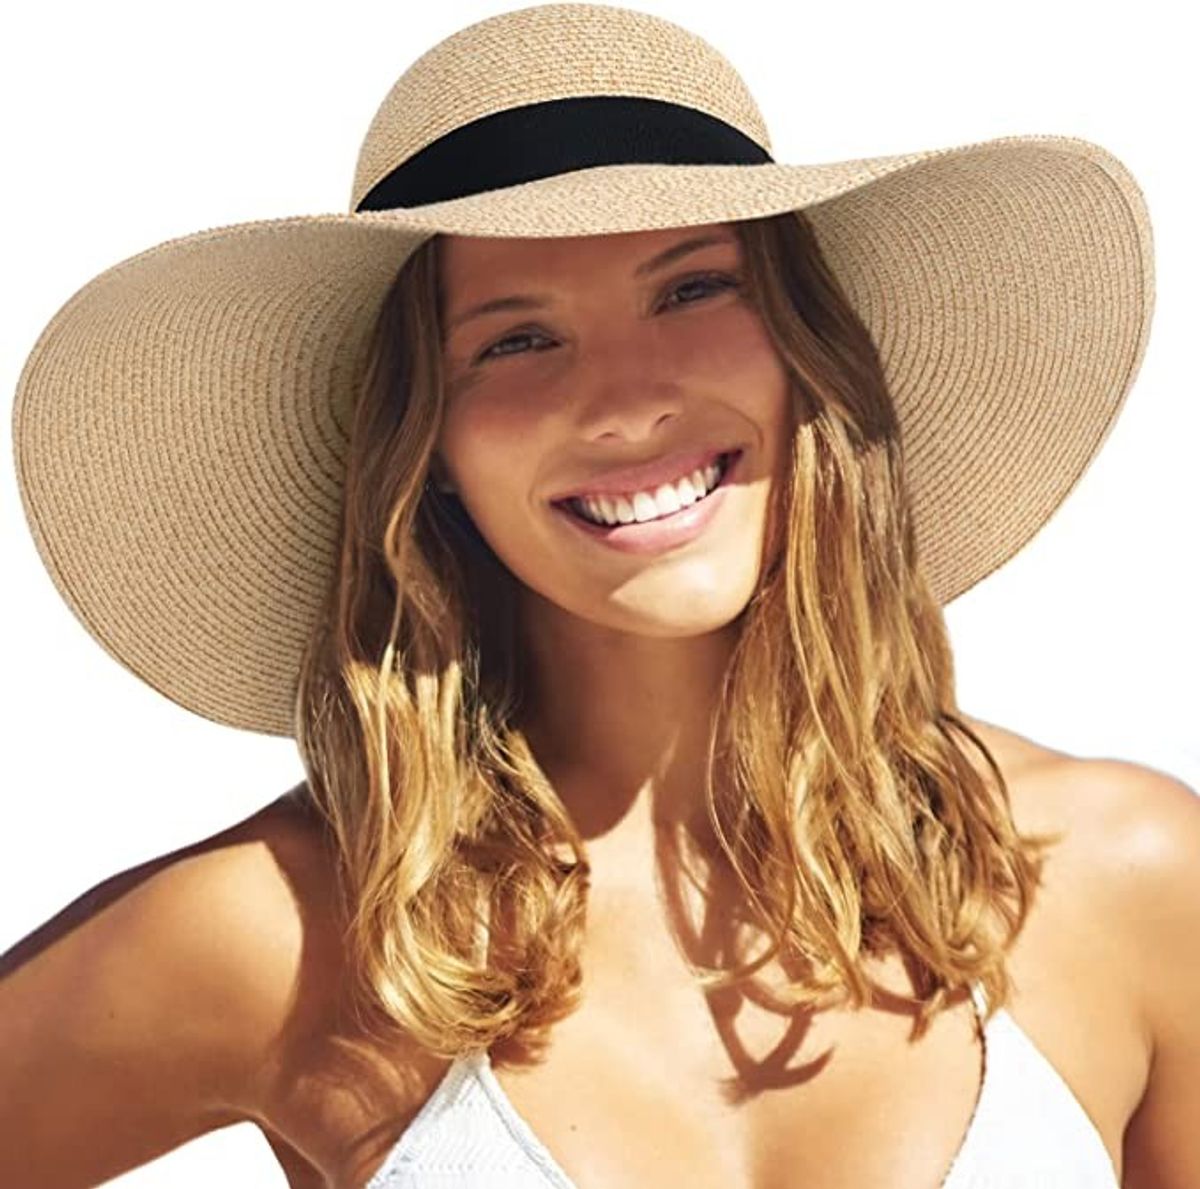 Don't Sweat It: These Must-Haves Will Help You Survive The Summer Heat